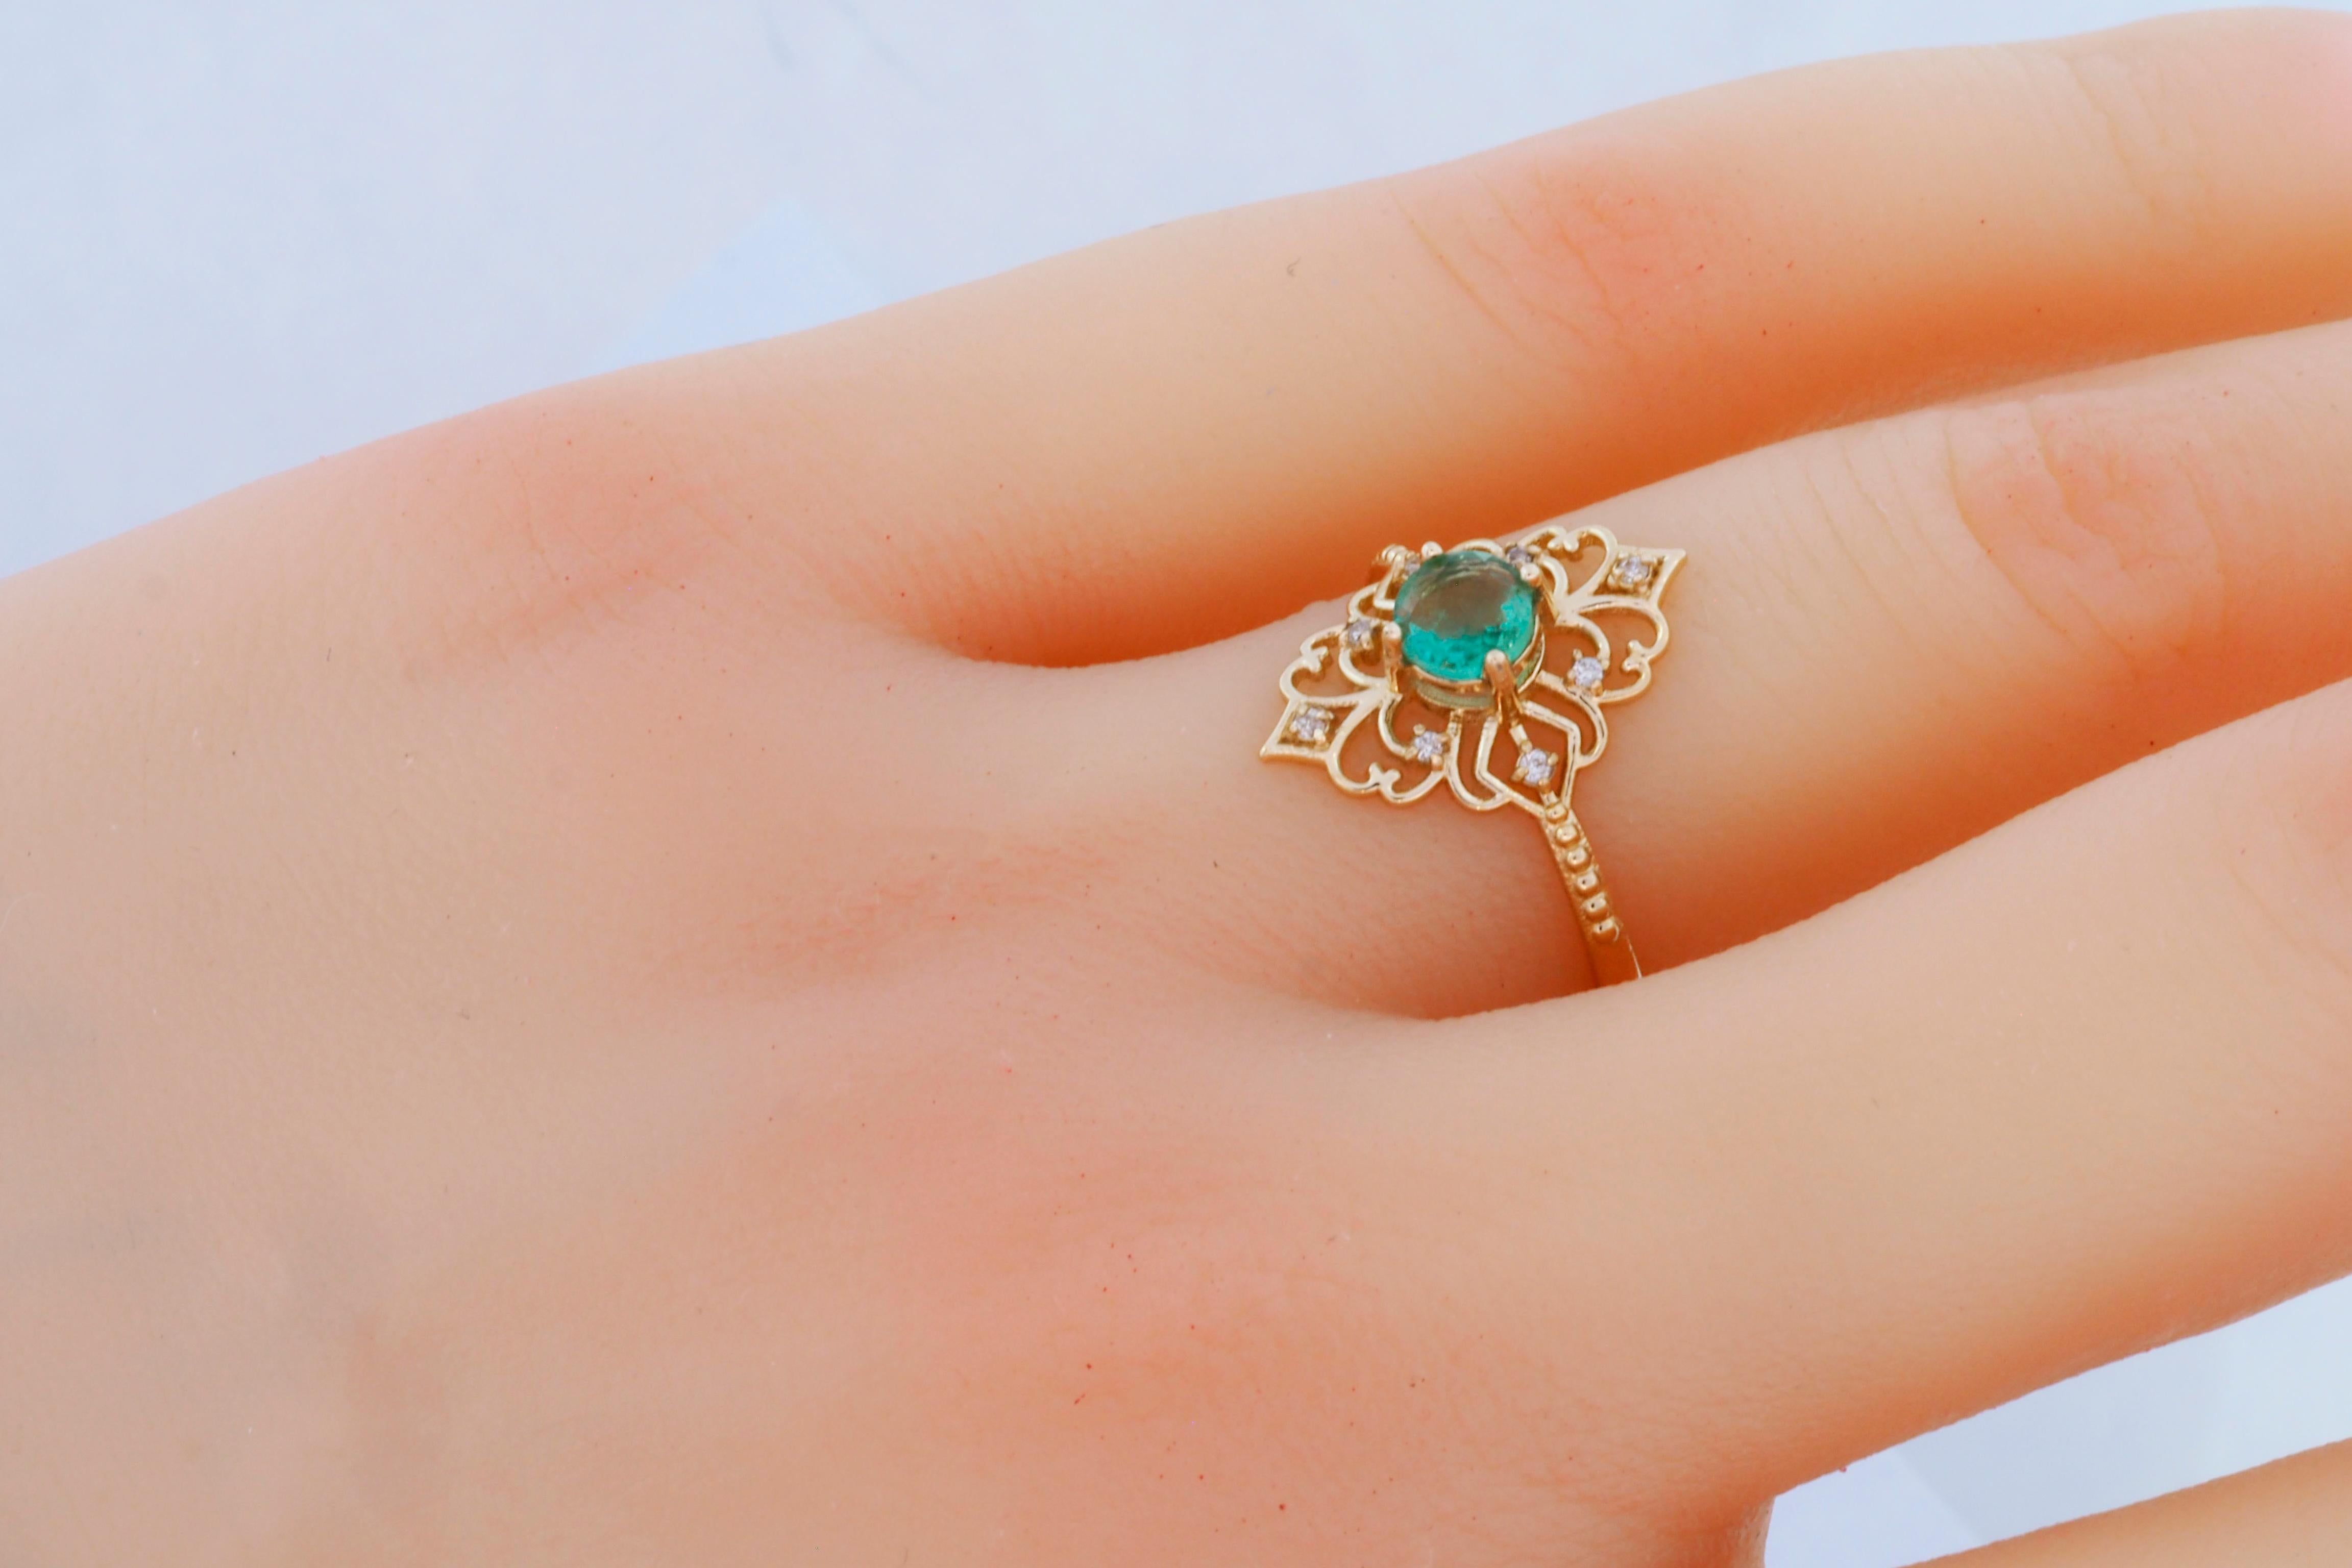 Round emerald ring. 
14k solid gold ring with Emerald and diamonds. Vintage emerald ring. Emerald engagement ring. May Birthstone Ring.

Metal: 14k gold
Weight: 1.6 g. depends from size.

Set with emerald, color - bluish green
Round cut, 0.50 ct. in